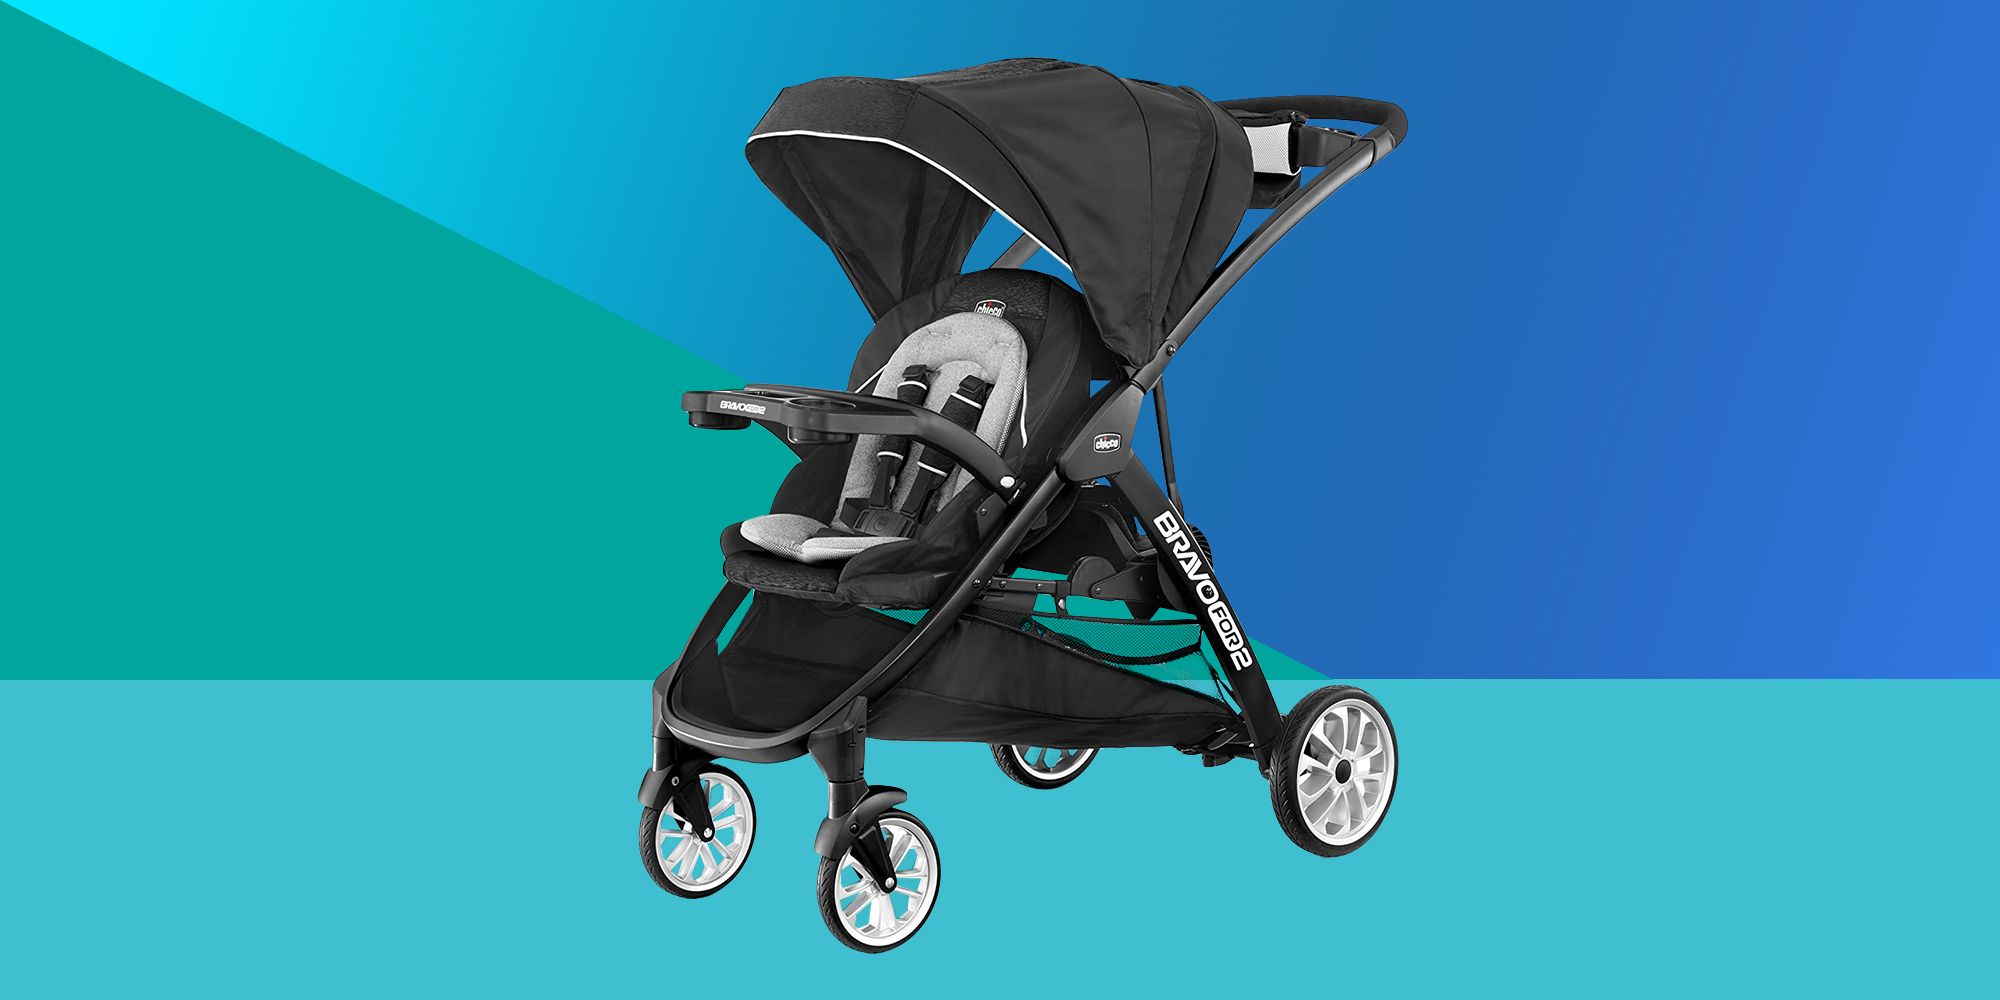 Standard Sit N Stand Stroller Allows Children to Sit or Stand Along the Ride 